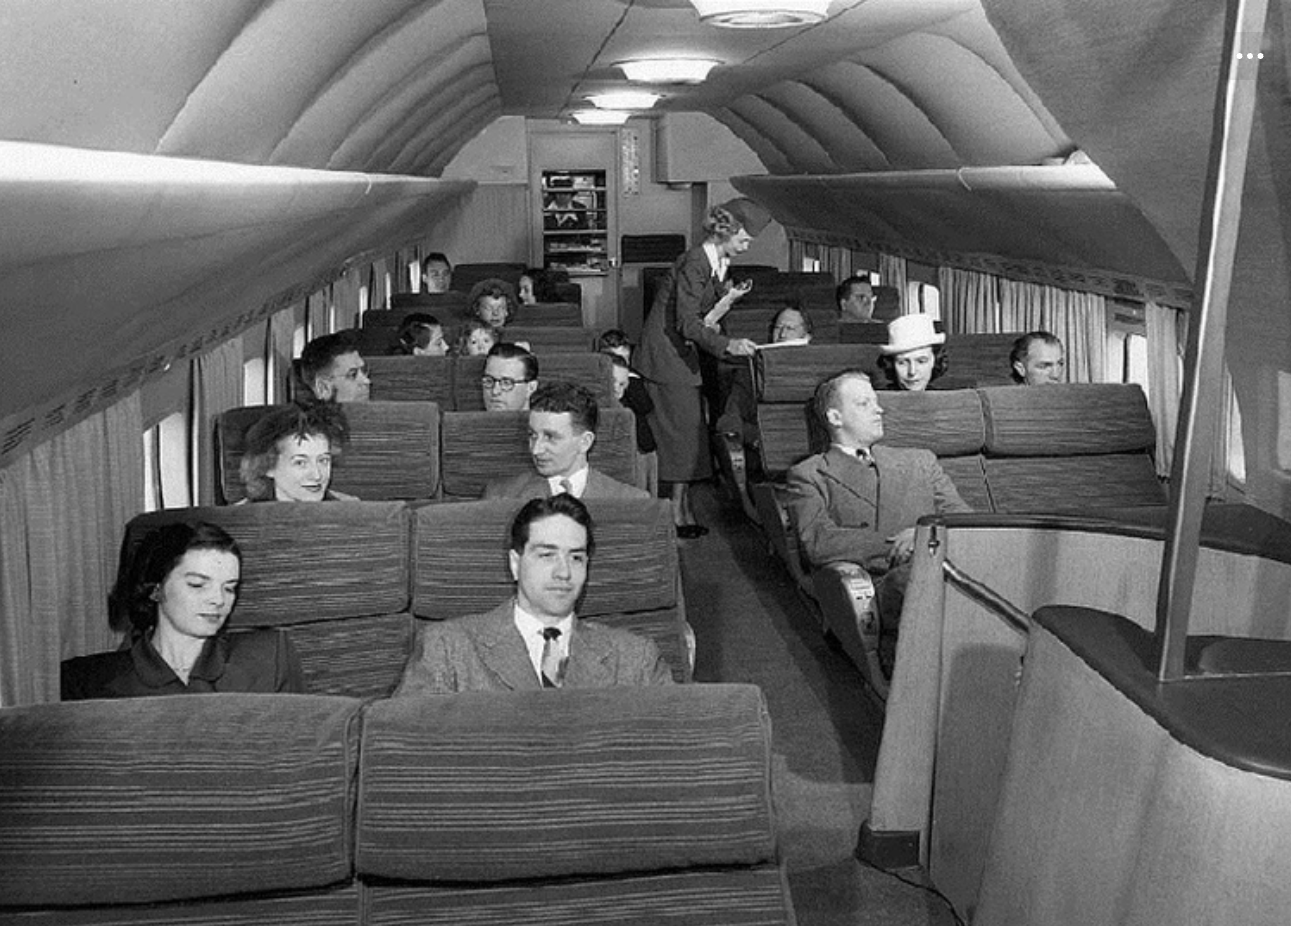 1970s commercial airplane